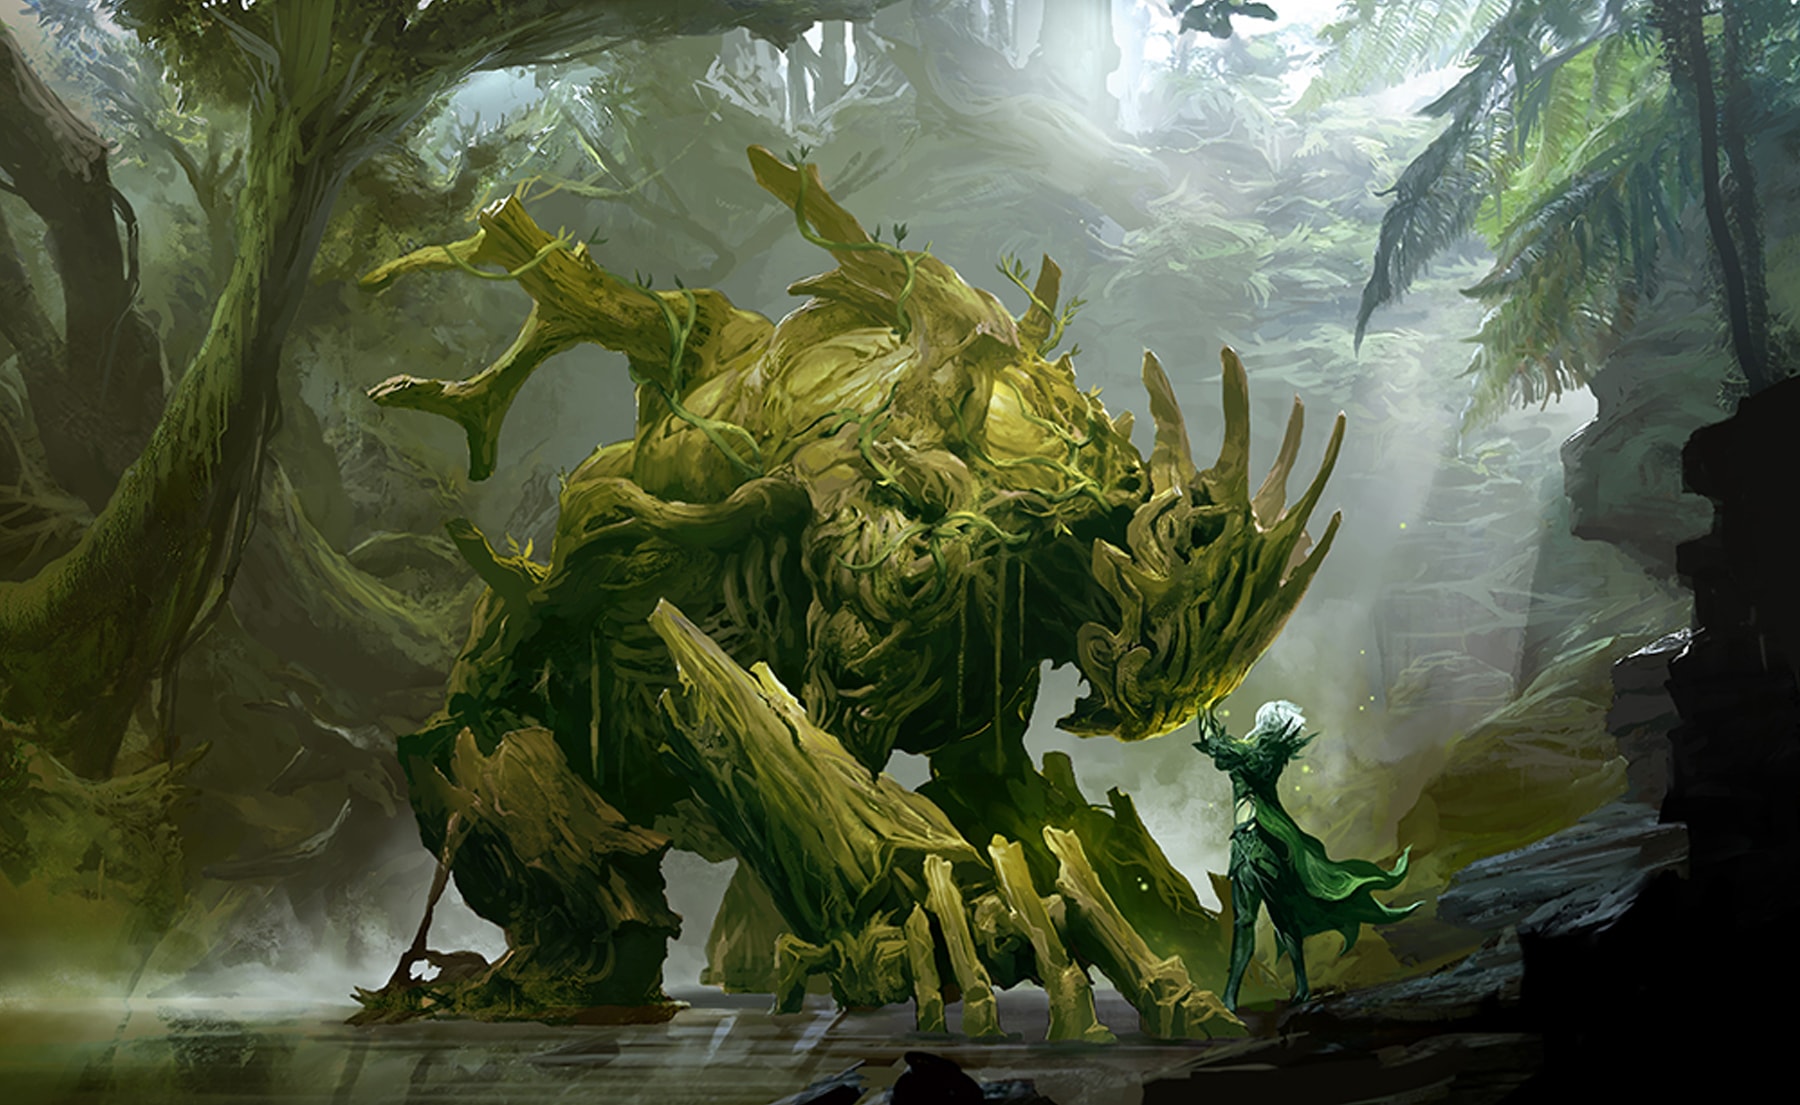 Guild Wars 2 character Caithe confronts a tree-like creature in the middle of the forest